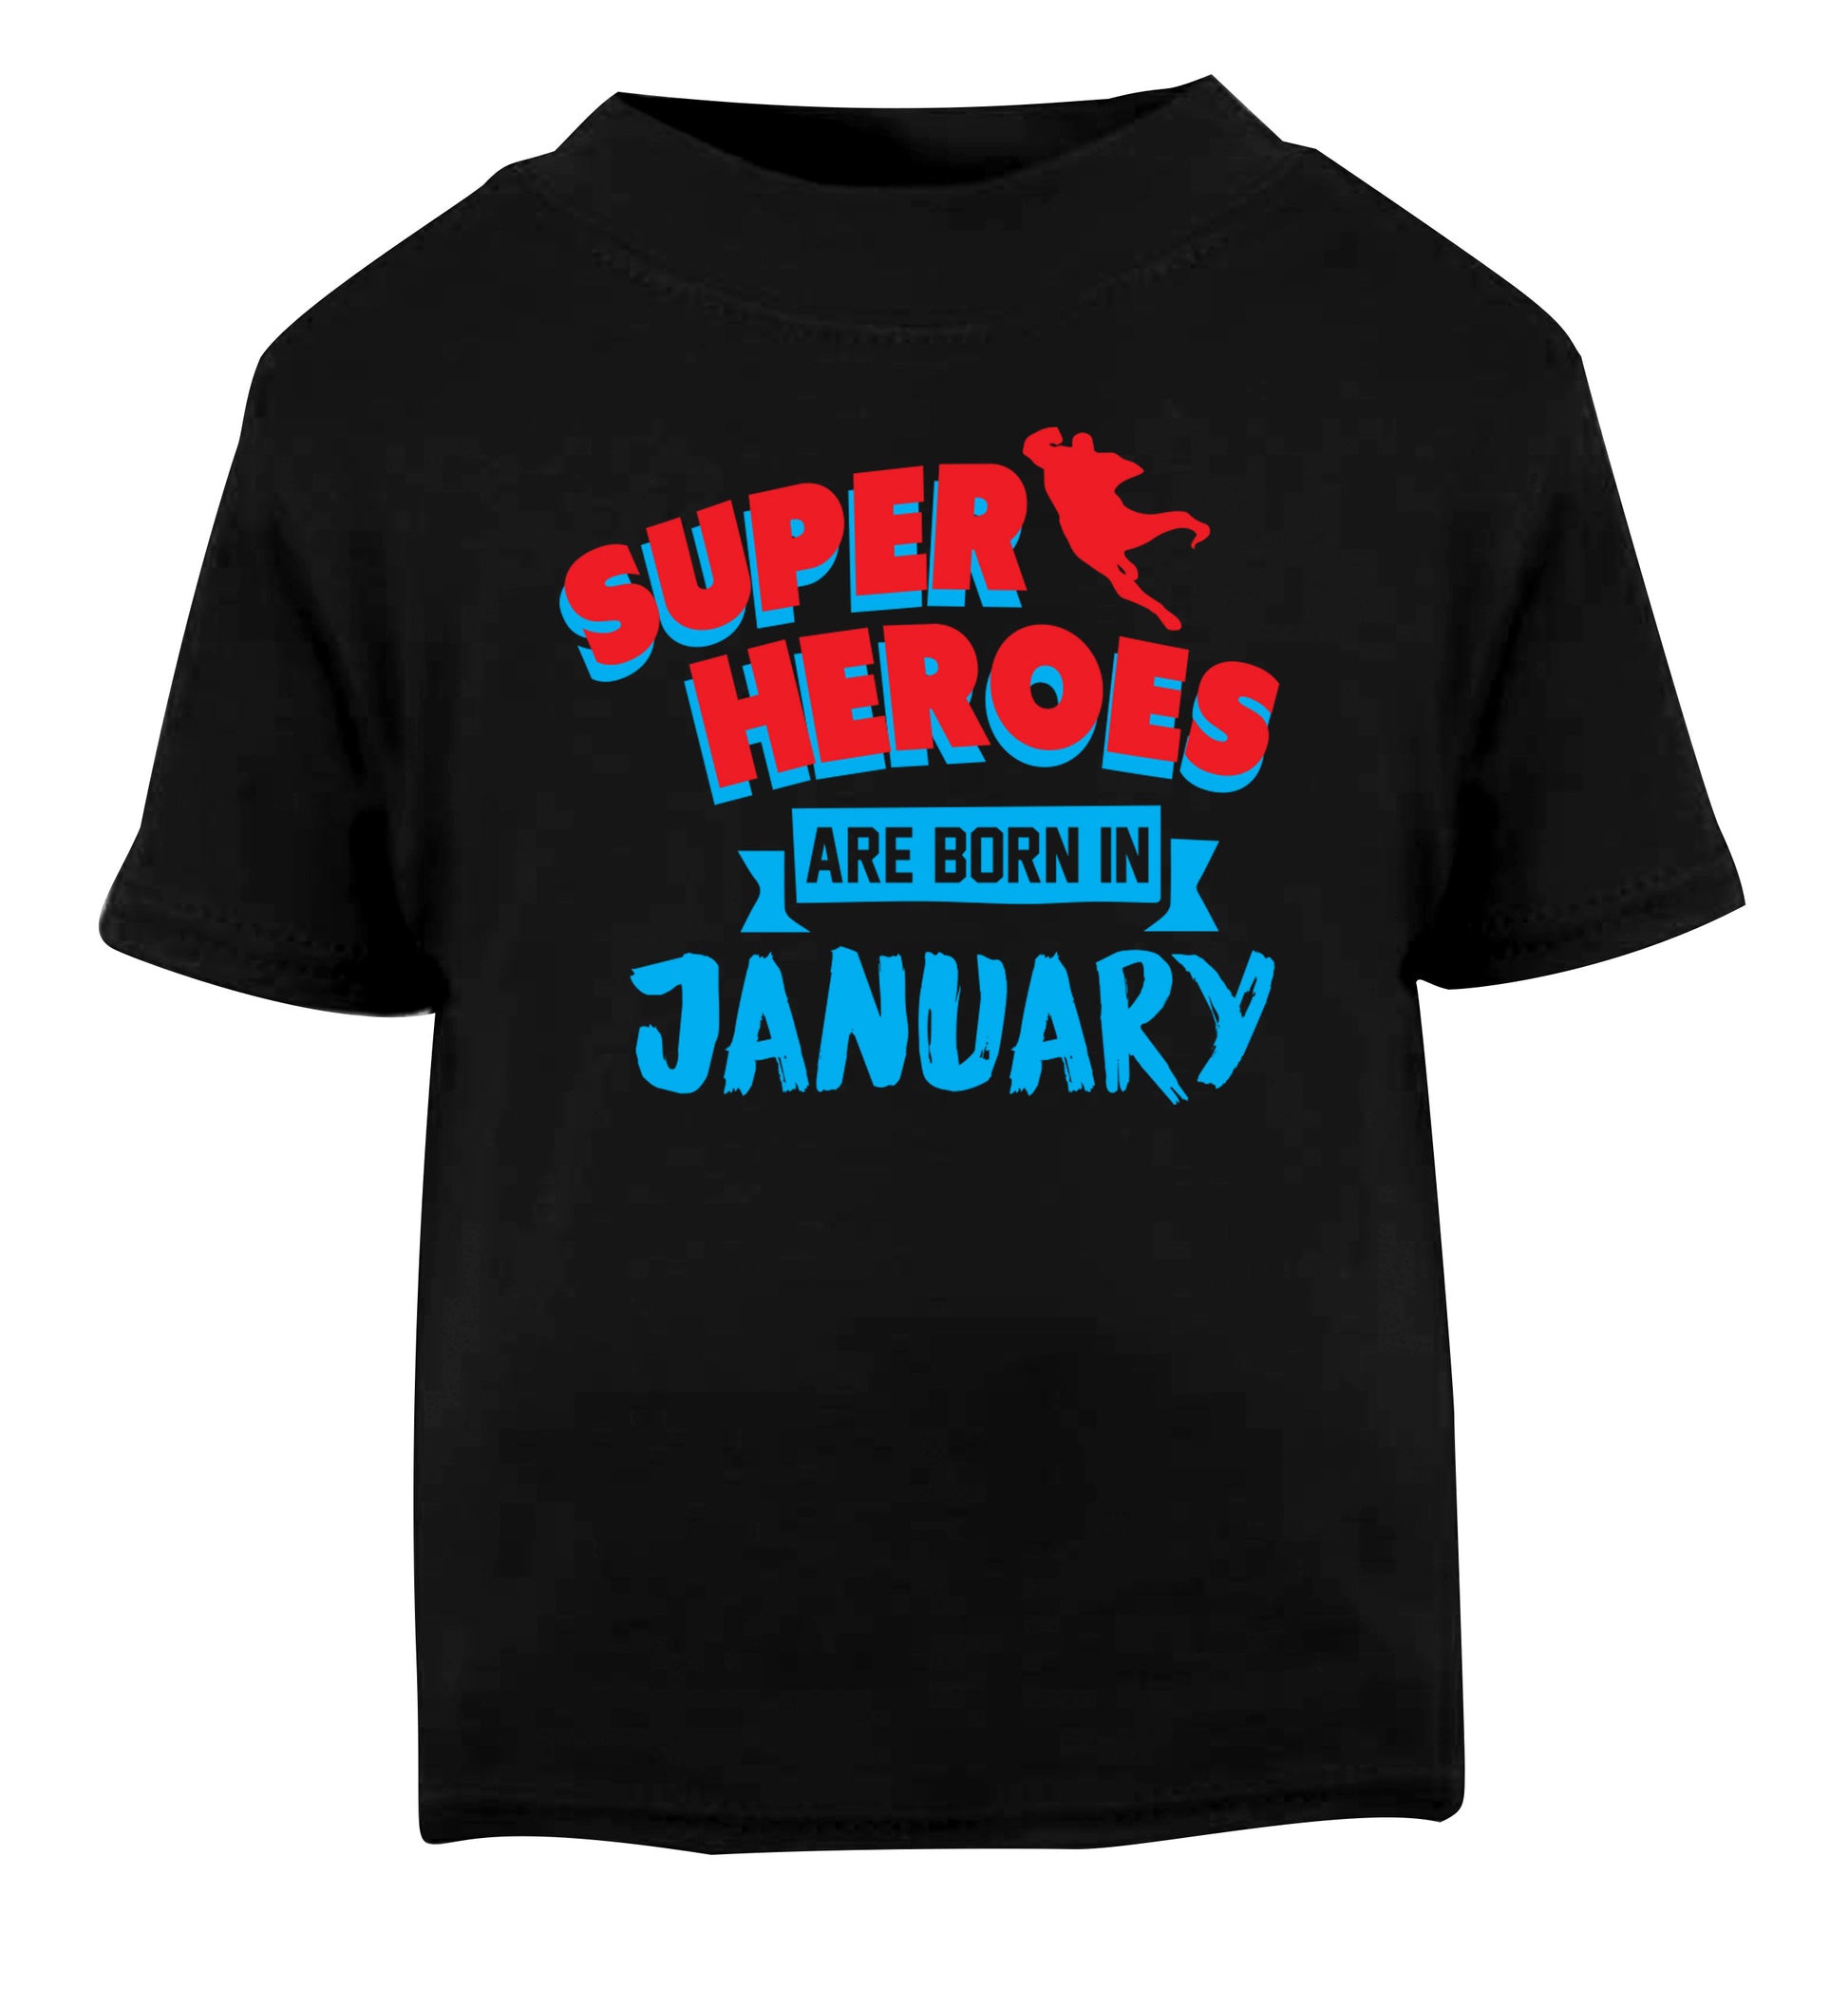 Superheros are born in January Black Baby Toddler Tshirt 2 years